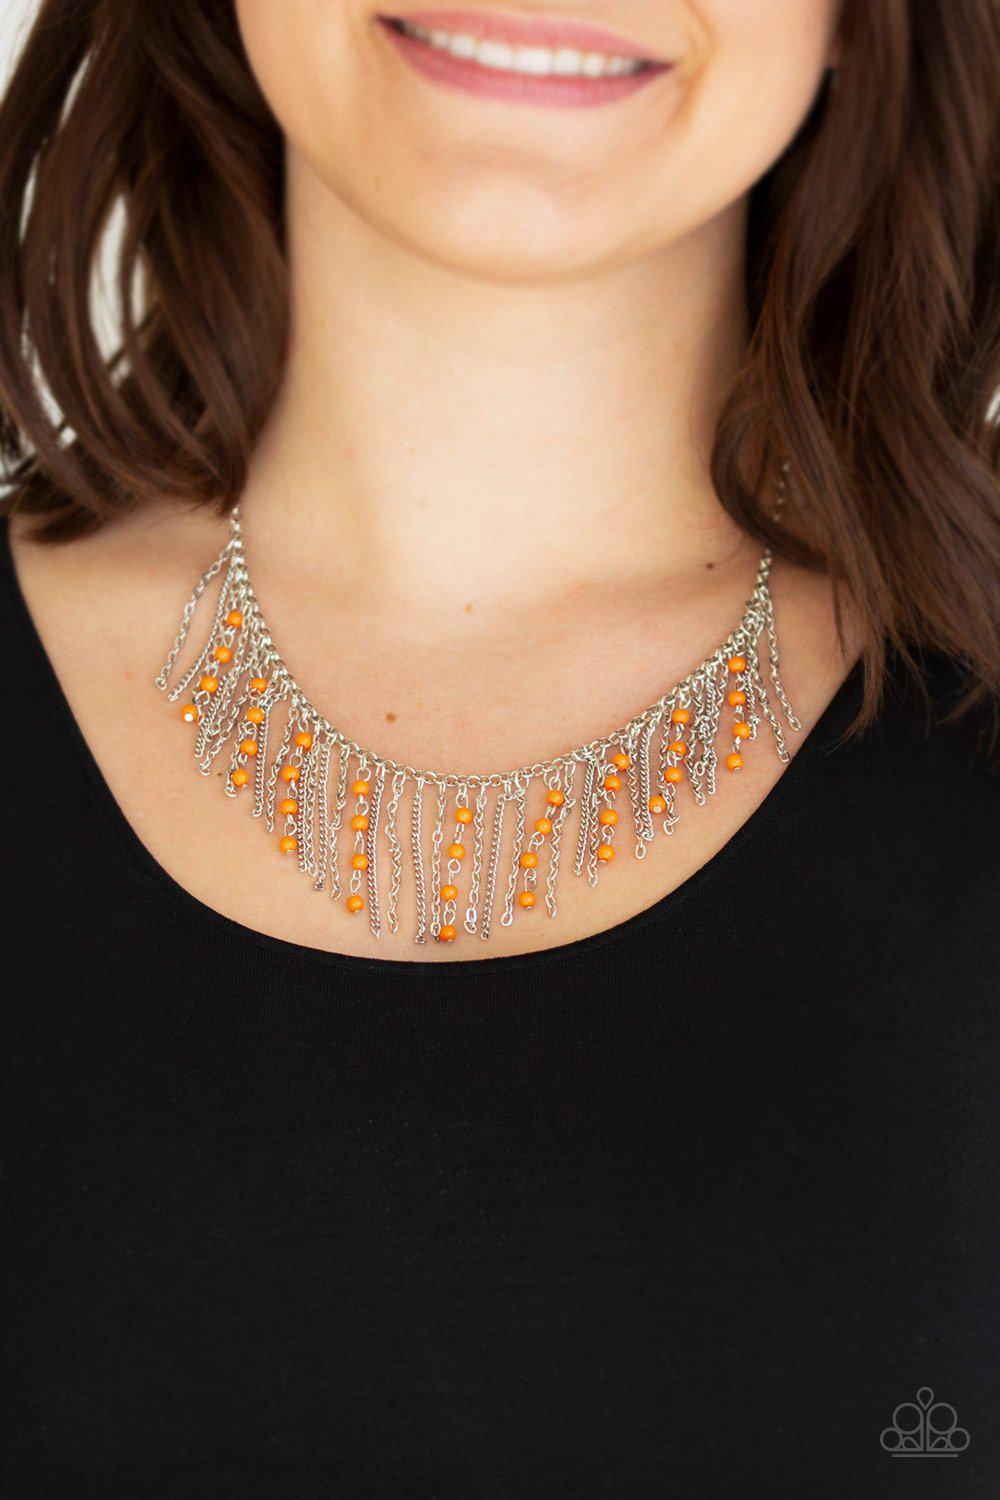 Harlem Hideaway Orange and Silver Necklace - Paparazzi Accessories - model -CarasShop.com - $5 Jewelry by Cara Jewels